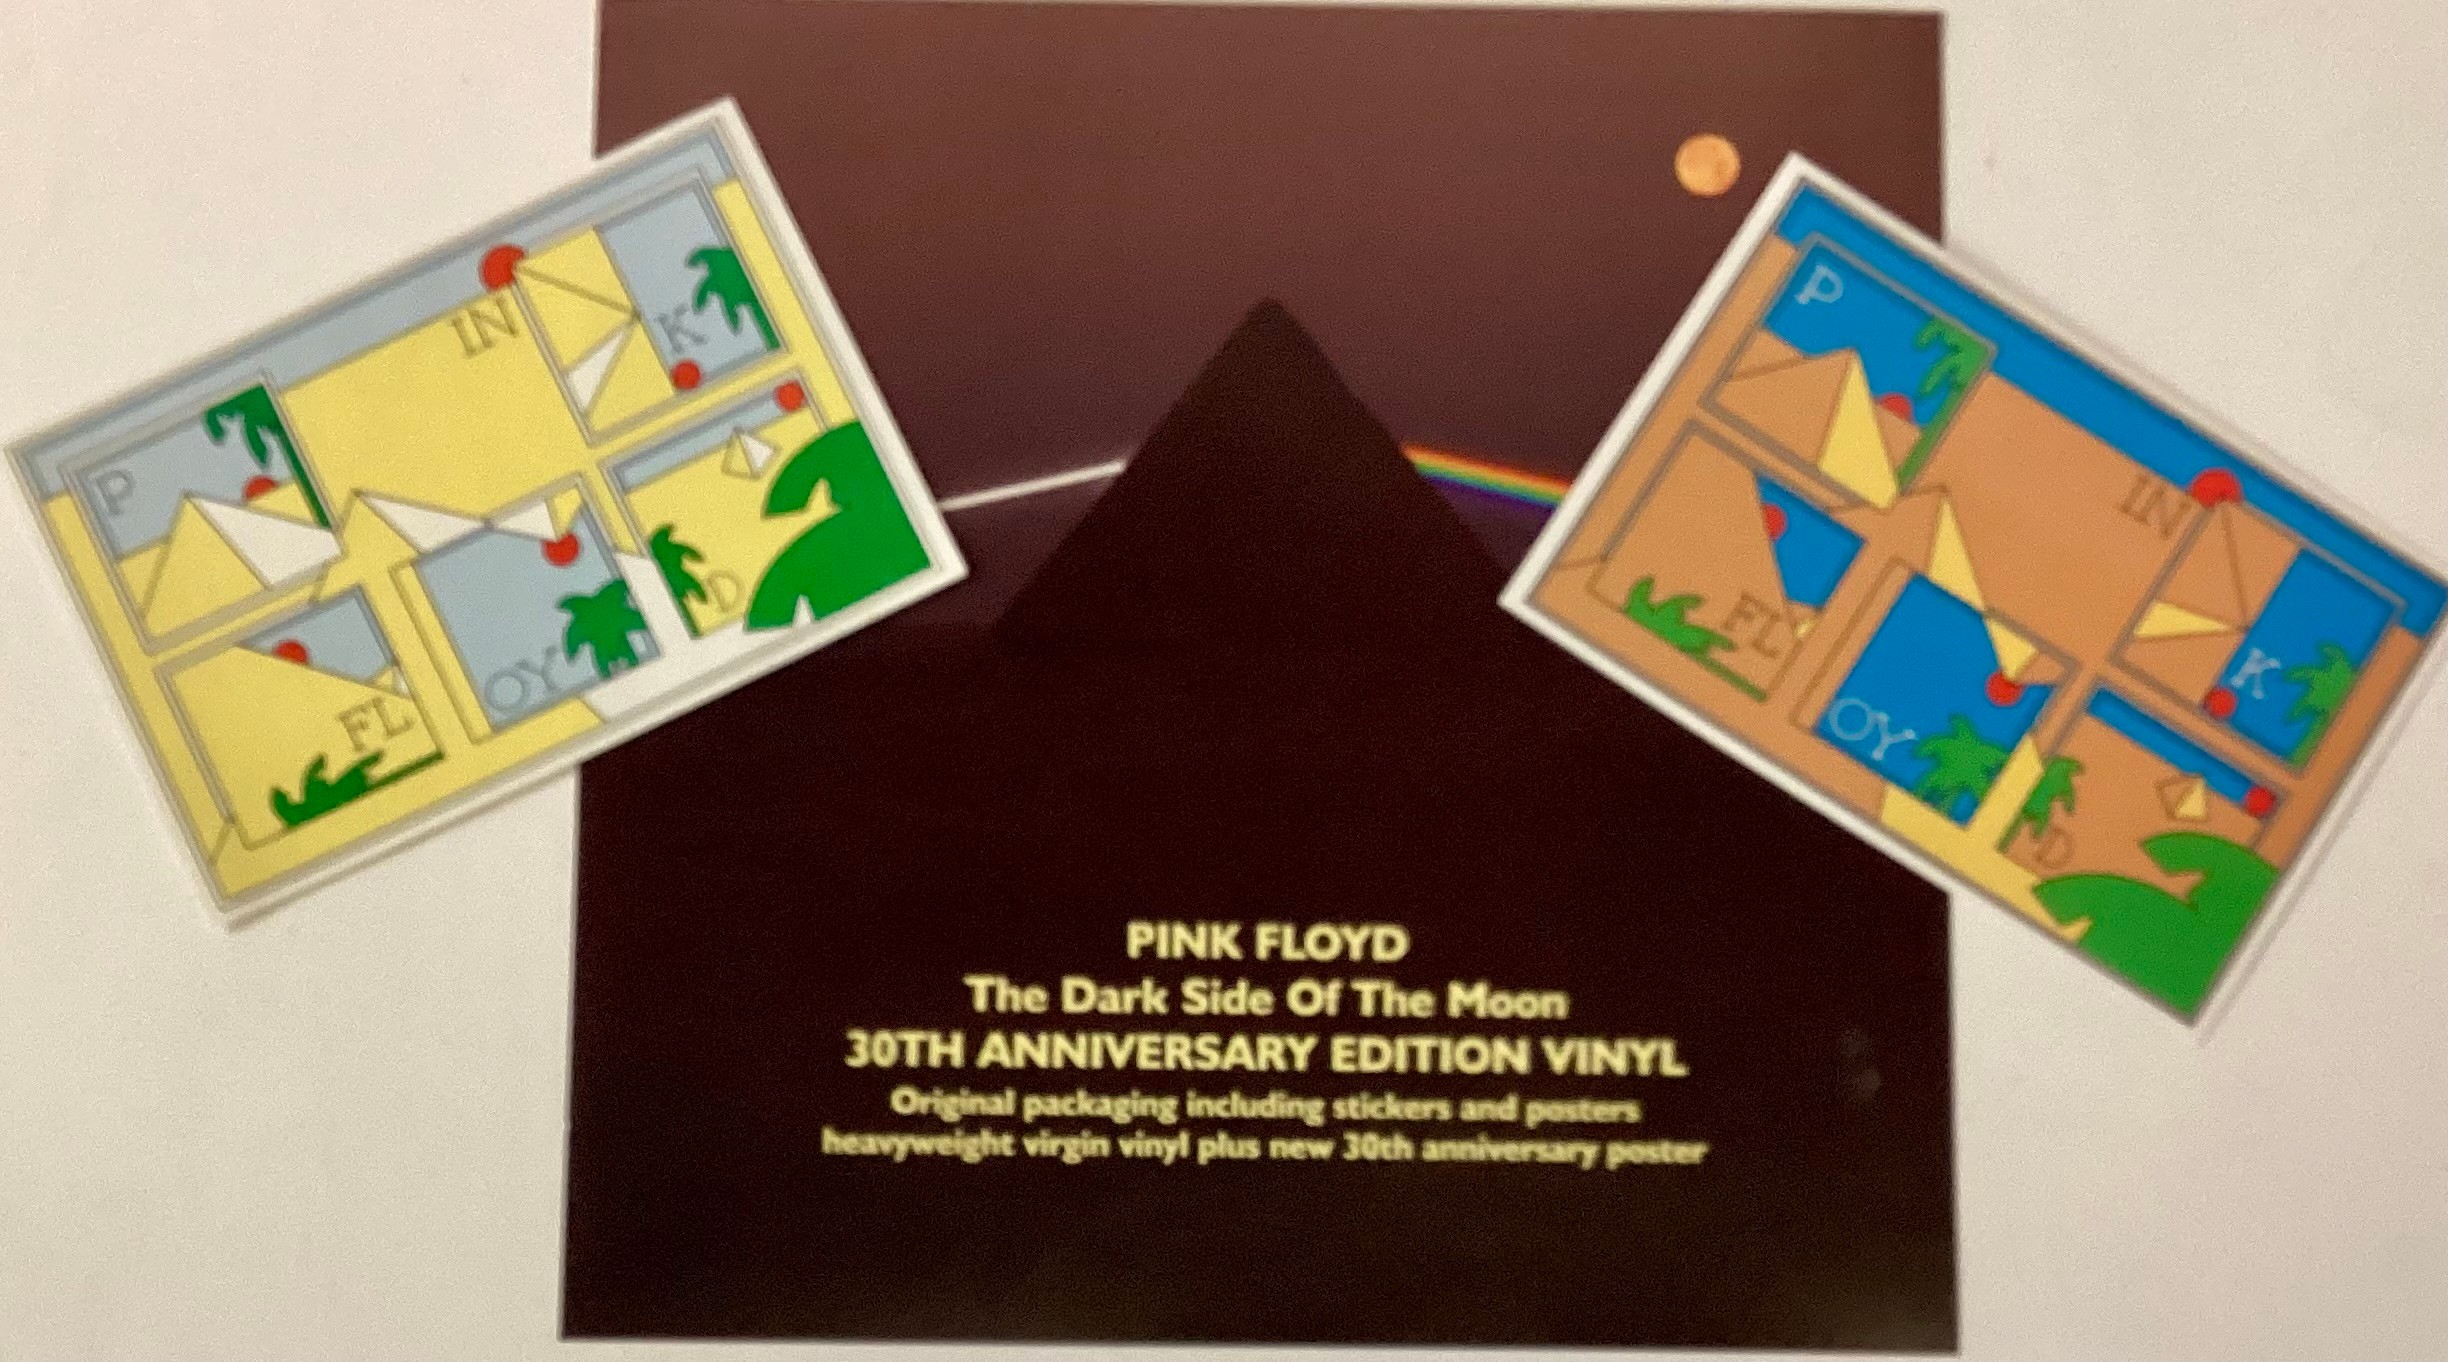 PINK FLOYD 30th ANNIVERSARY EDITION VINYL ALBUM ‘THE DARK SIDE OF THE ROOM’. Great mint condition - Image 4 of 6